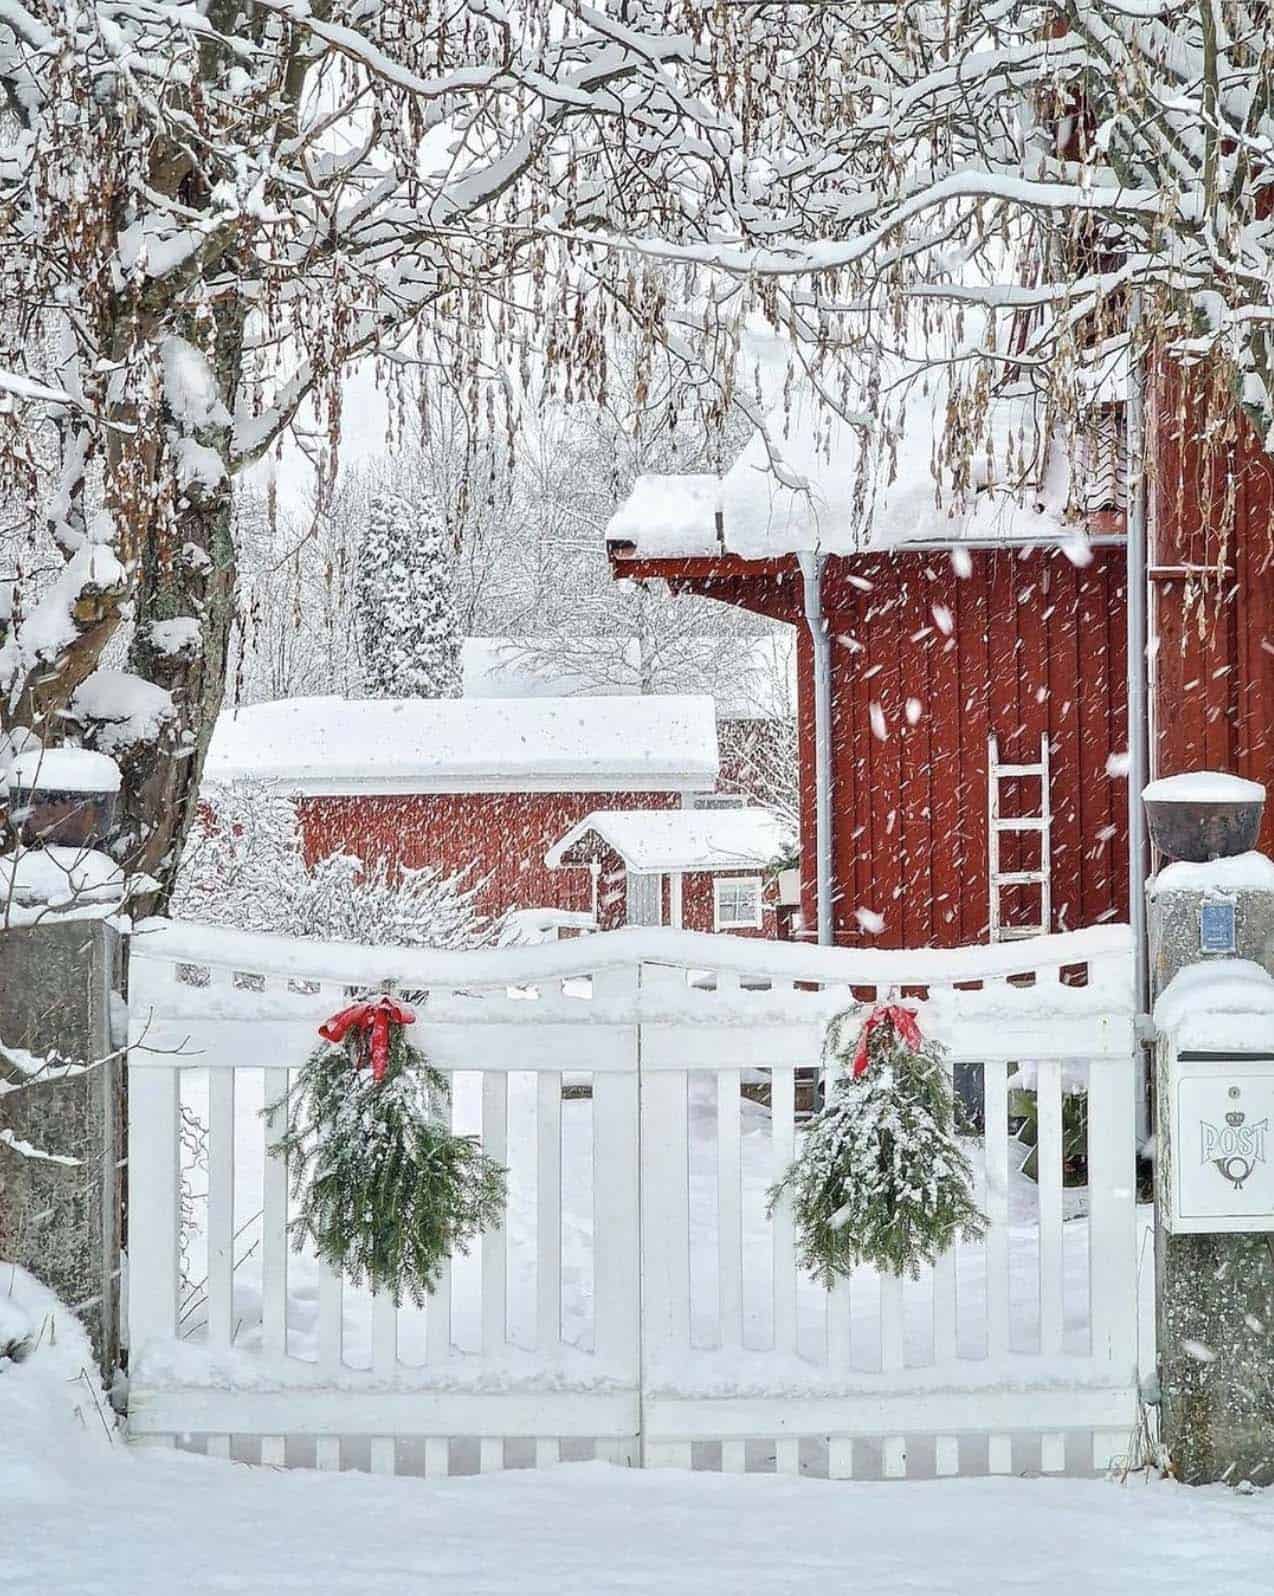 a-winter-wonderland-scene-with-a-red-house-white-fence-and-wreaths